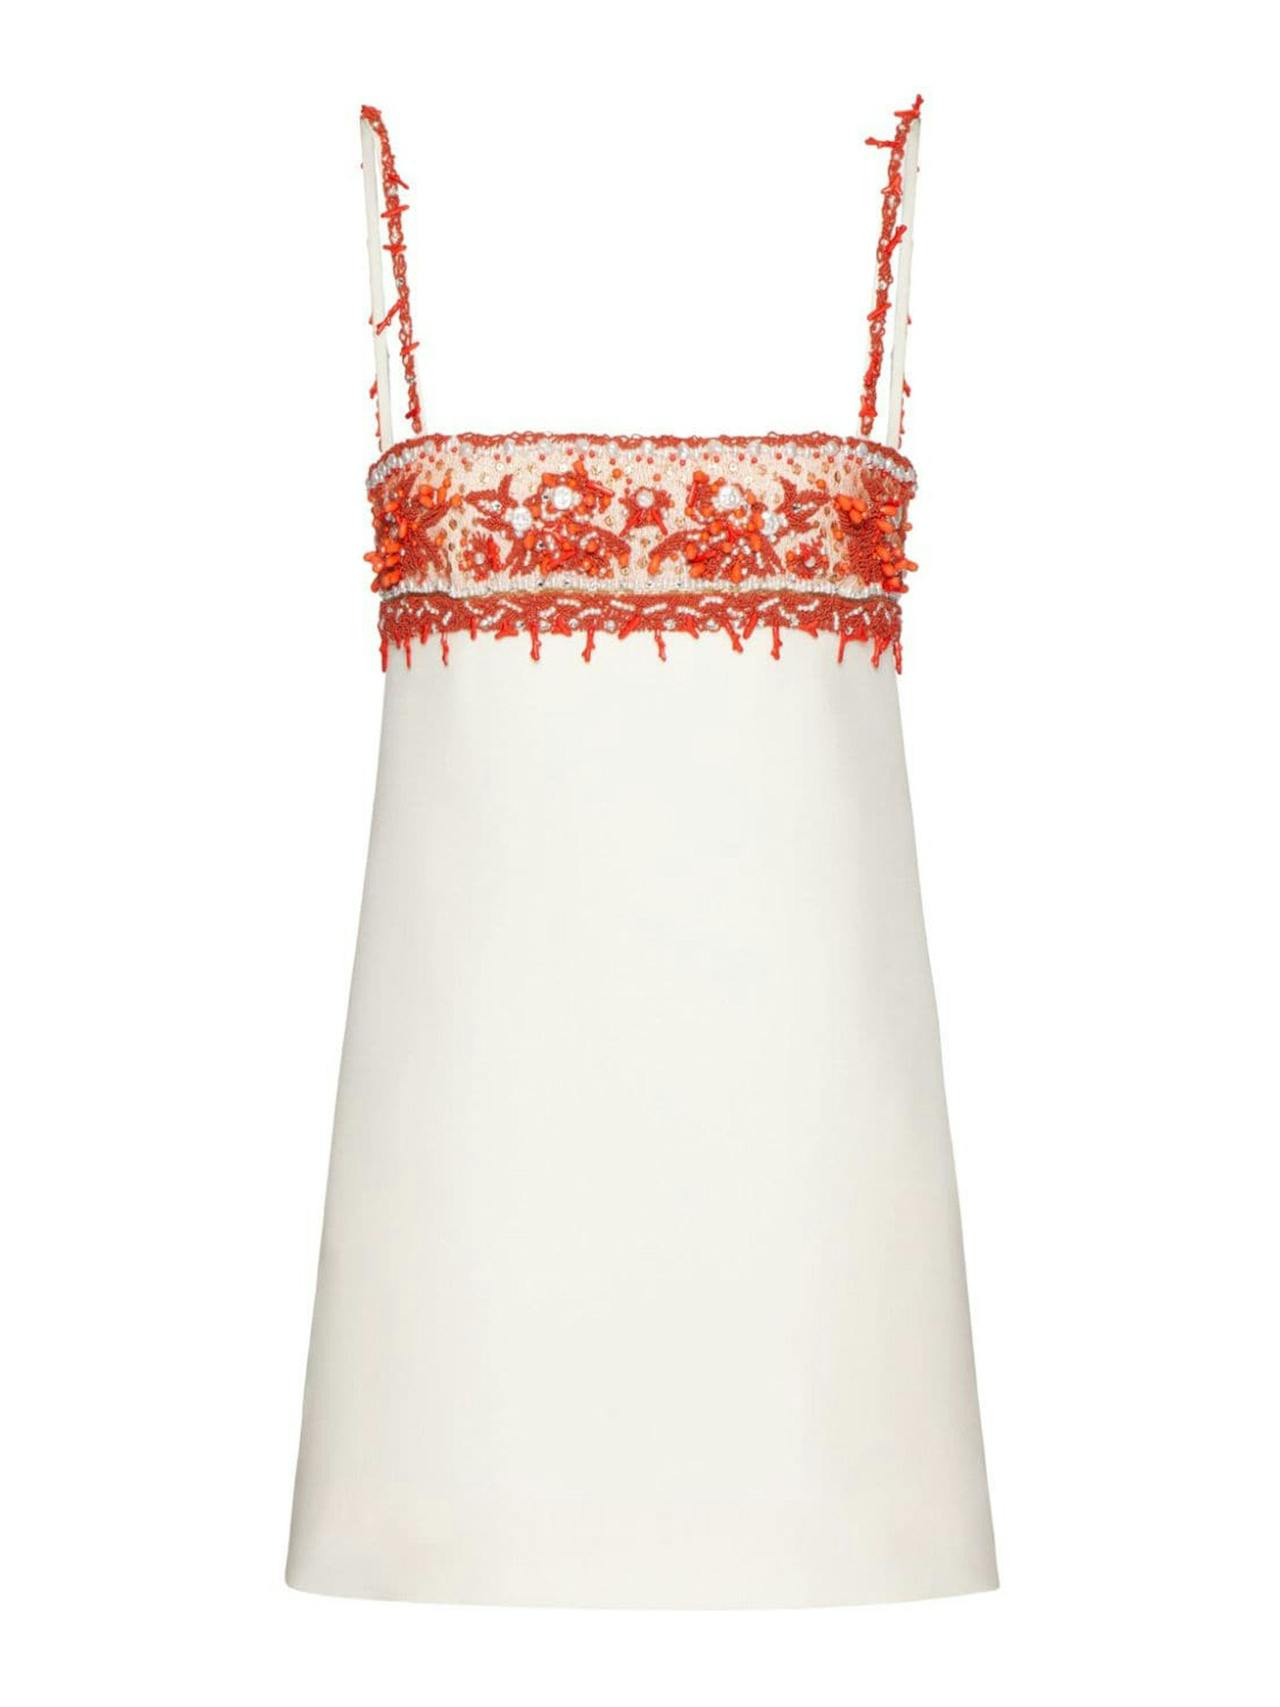 Crepe Couture embroidered minidress